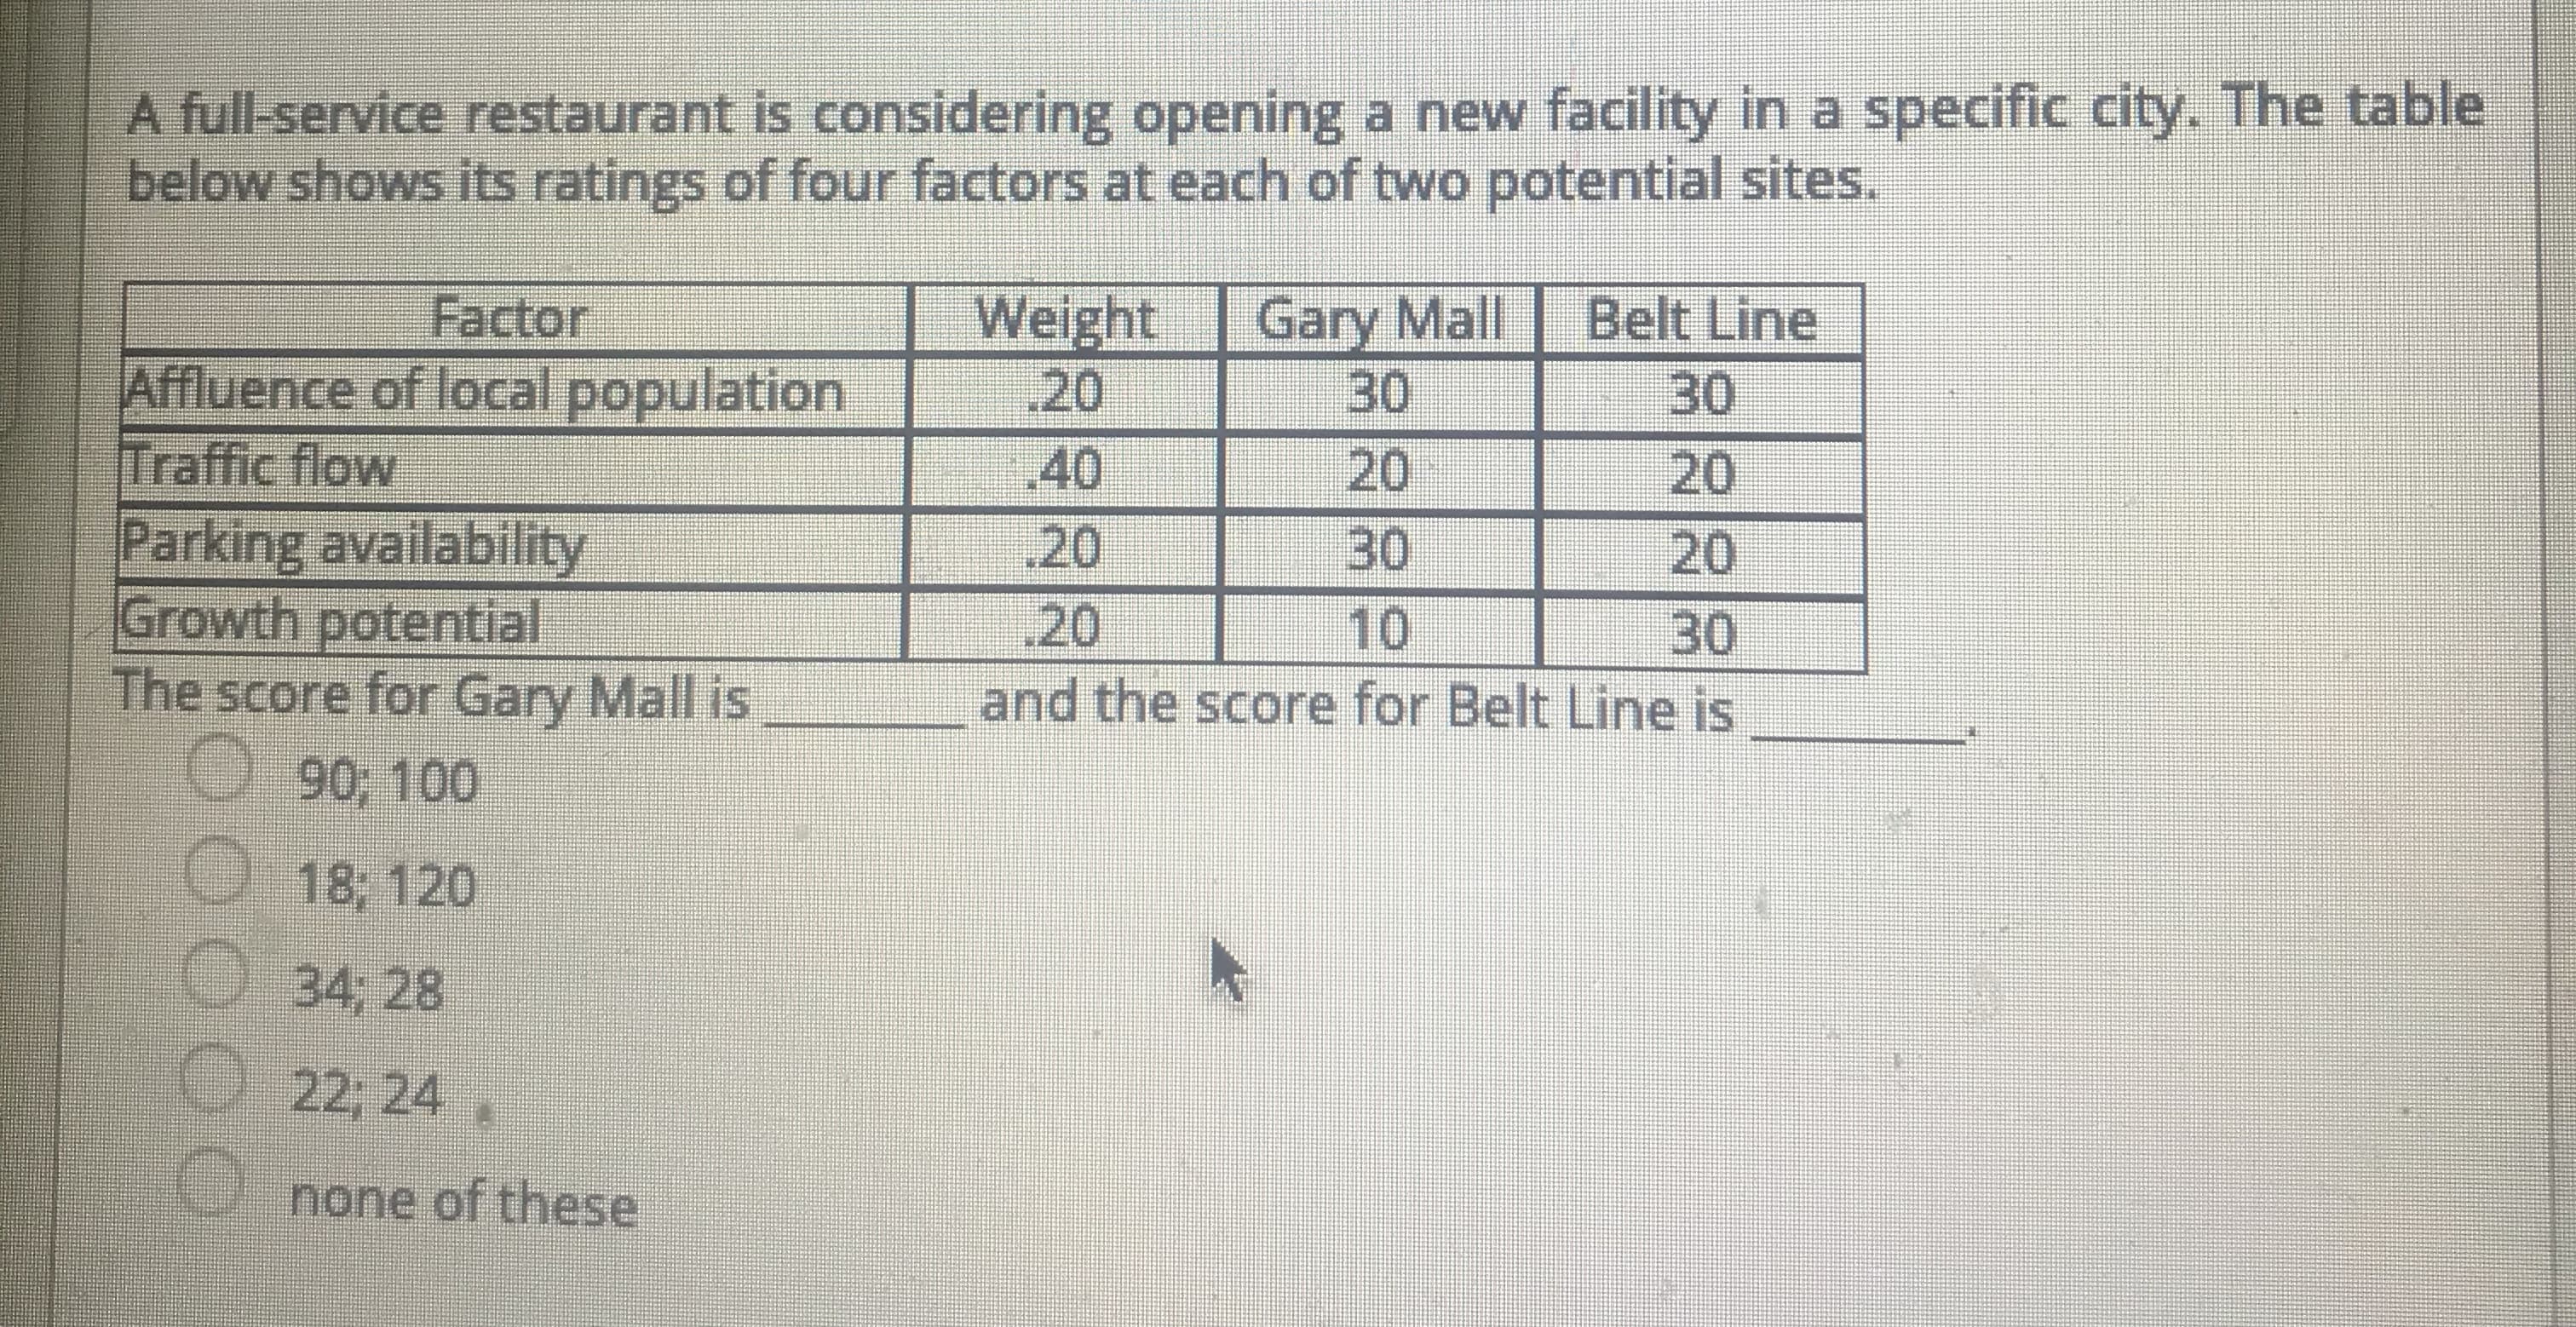 A full-service restaurant is considering opening a new facility in a specific city. The table
below shows its ratings of four factors at each of two potential sites.
Weight
20
Belt Line
30
20
Factor
Affluence of local population
Traffic flow
Parking availability
Growth potential
The score for Gary Mall is
O 90; 100
Gary Mall
30
40
20
20
30
20
30
and the score for Belt Line is
20
10
O 18, 120
O 34, 28
O
22; 24
O.none of these
